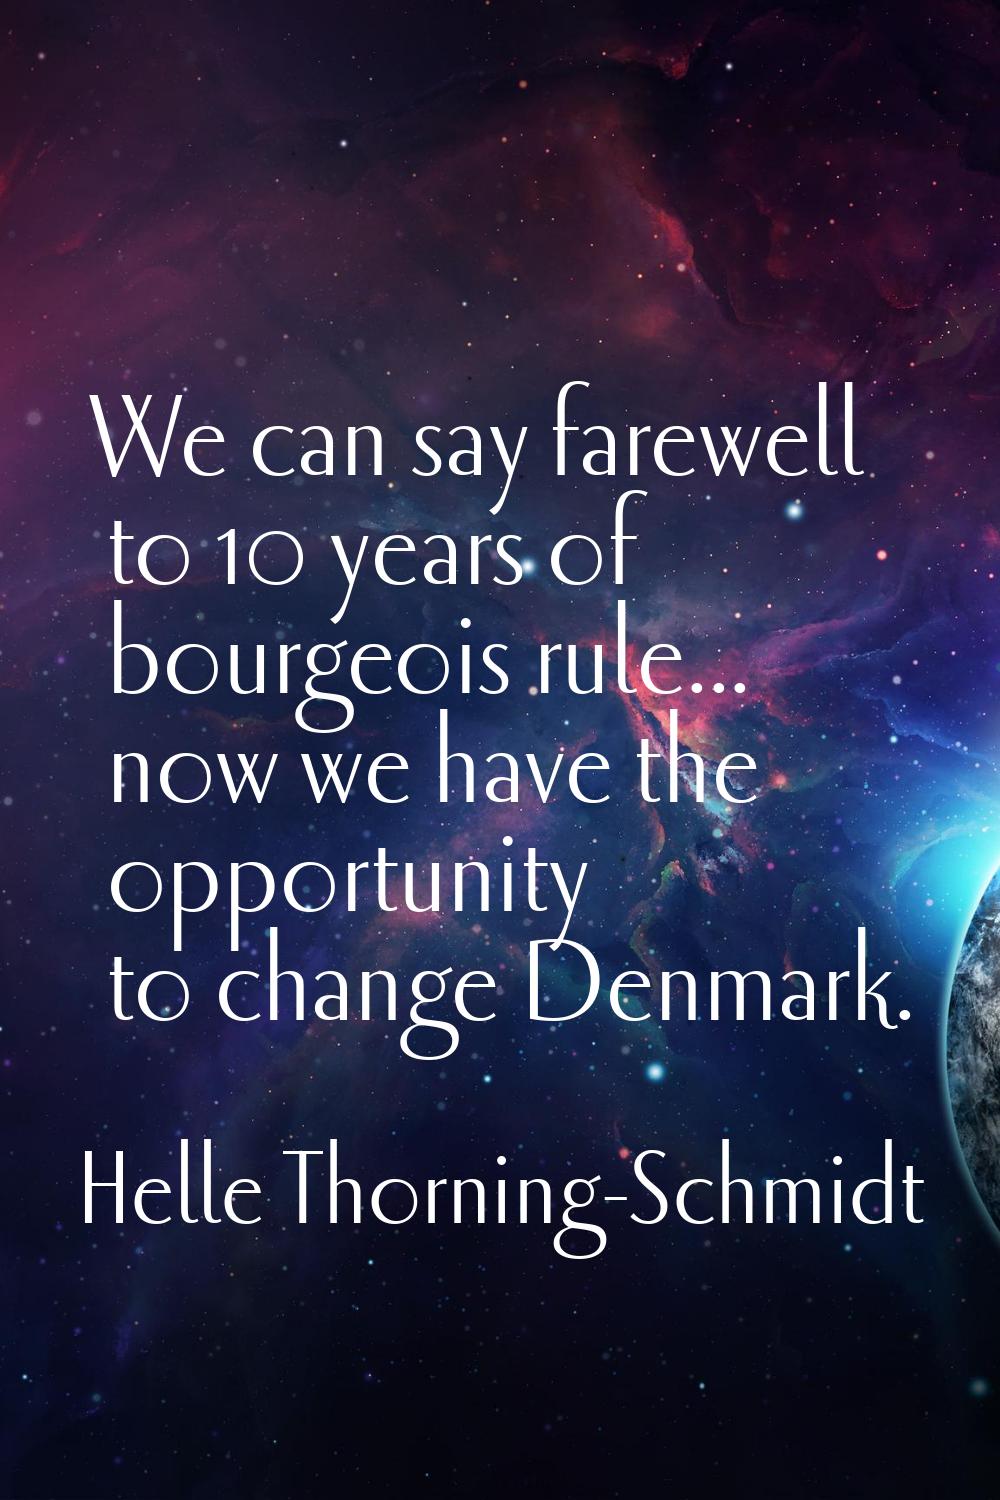 We can say farewell to 10 years of bourgeois rule... now we have the opportunity to change Denmark.